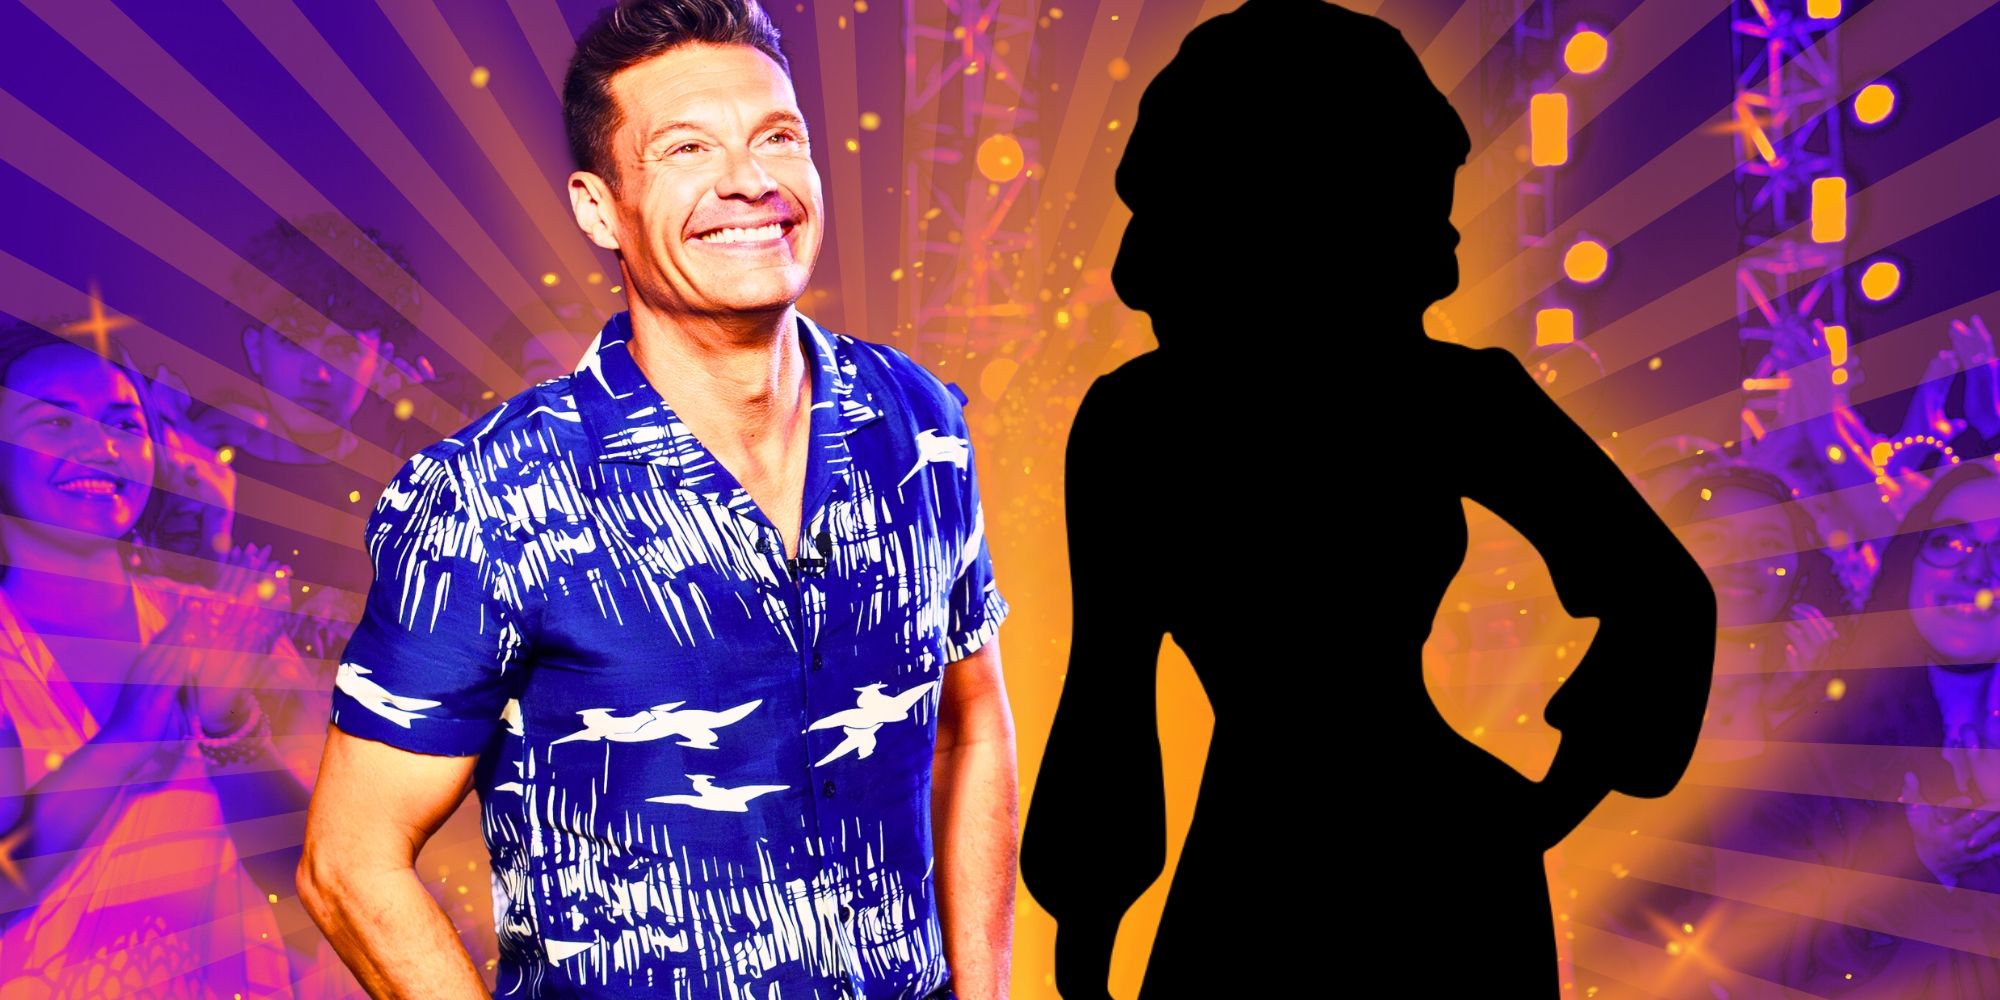 Ryan Seacrest, host of American Idol, smiles while standing next to a silhouette of a mystery woman.